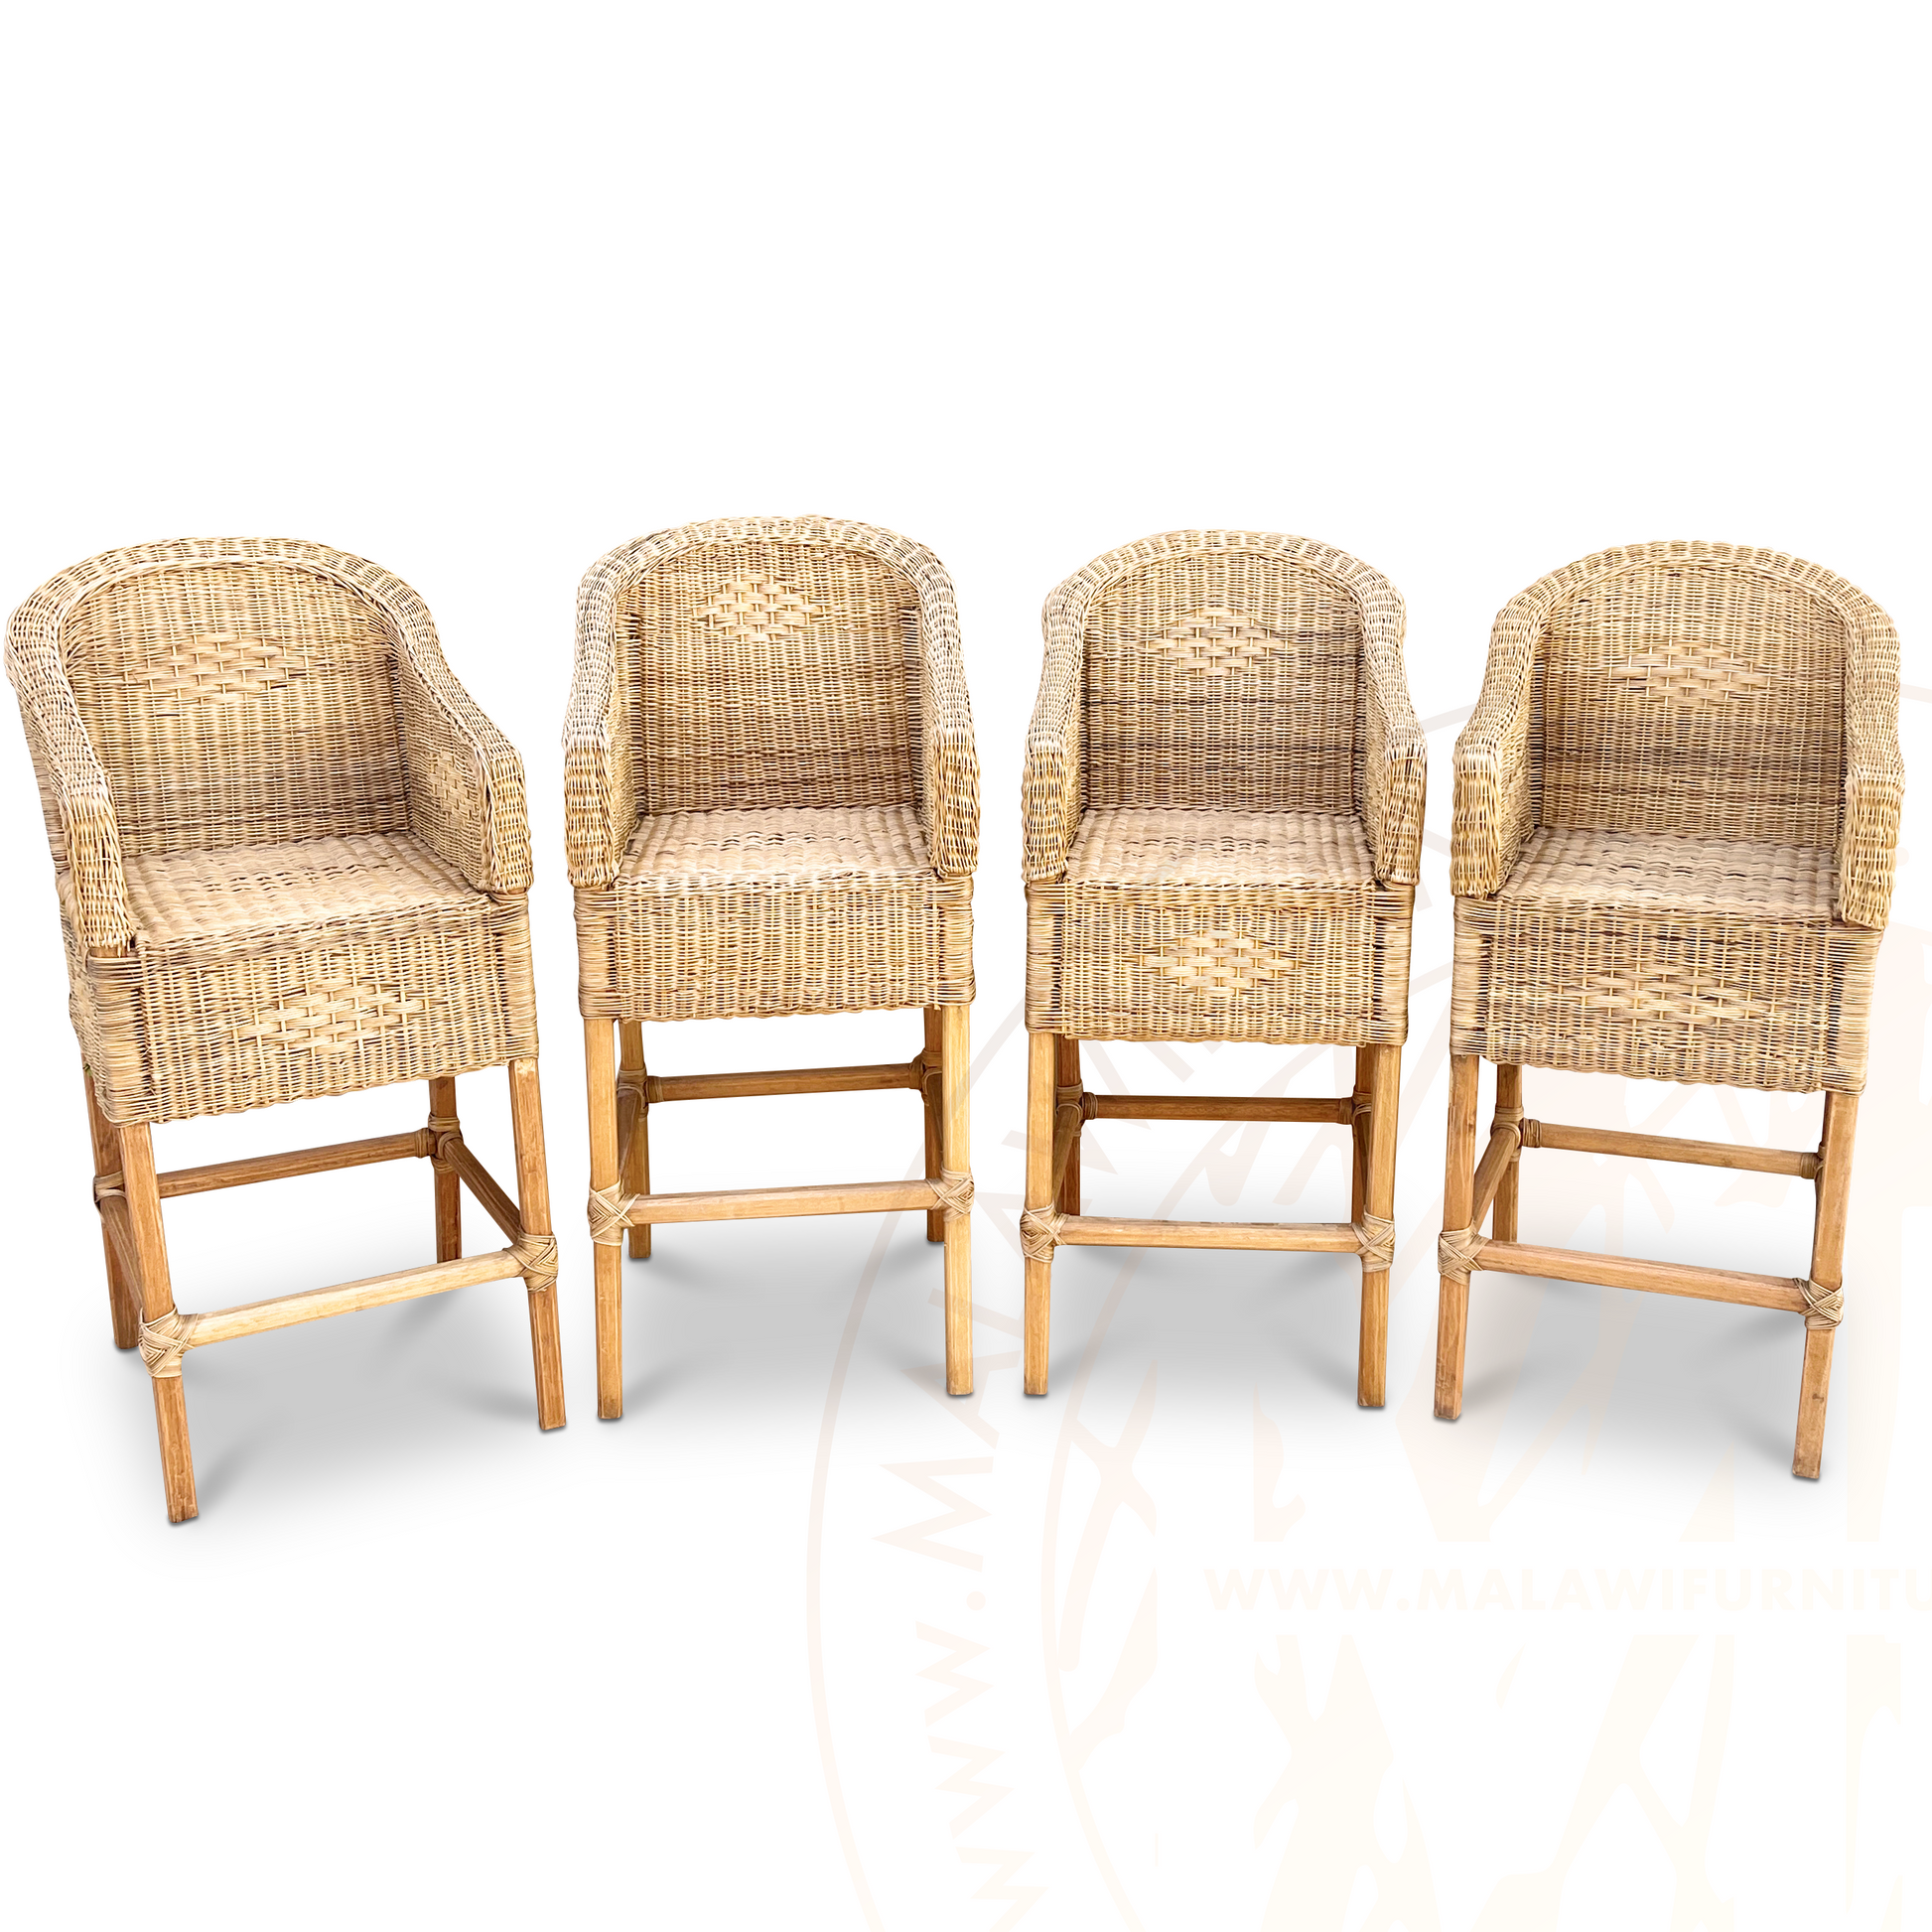 four Classic Bar Stools Chairs with Arms luxury